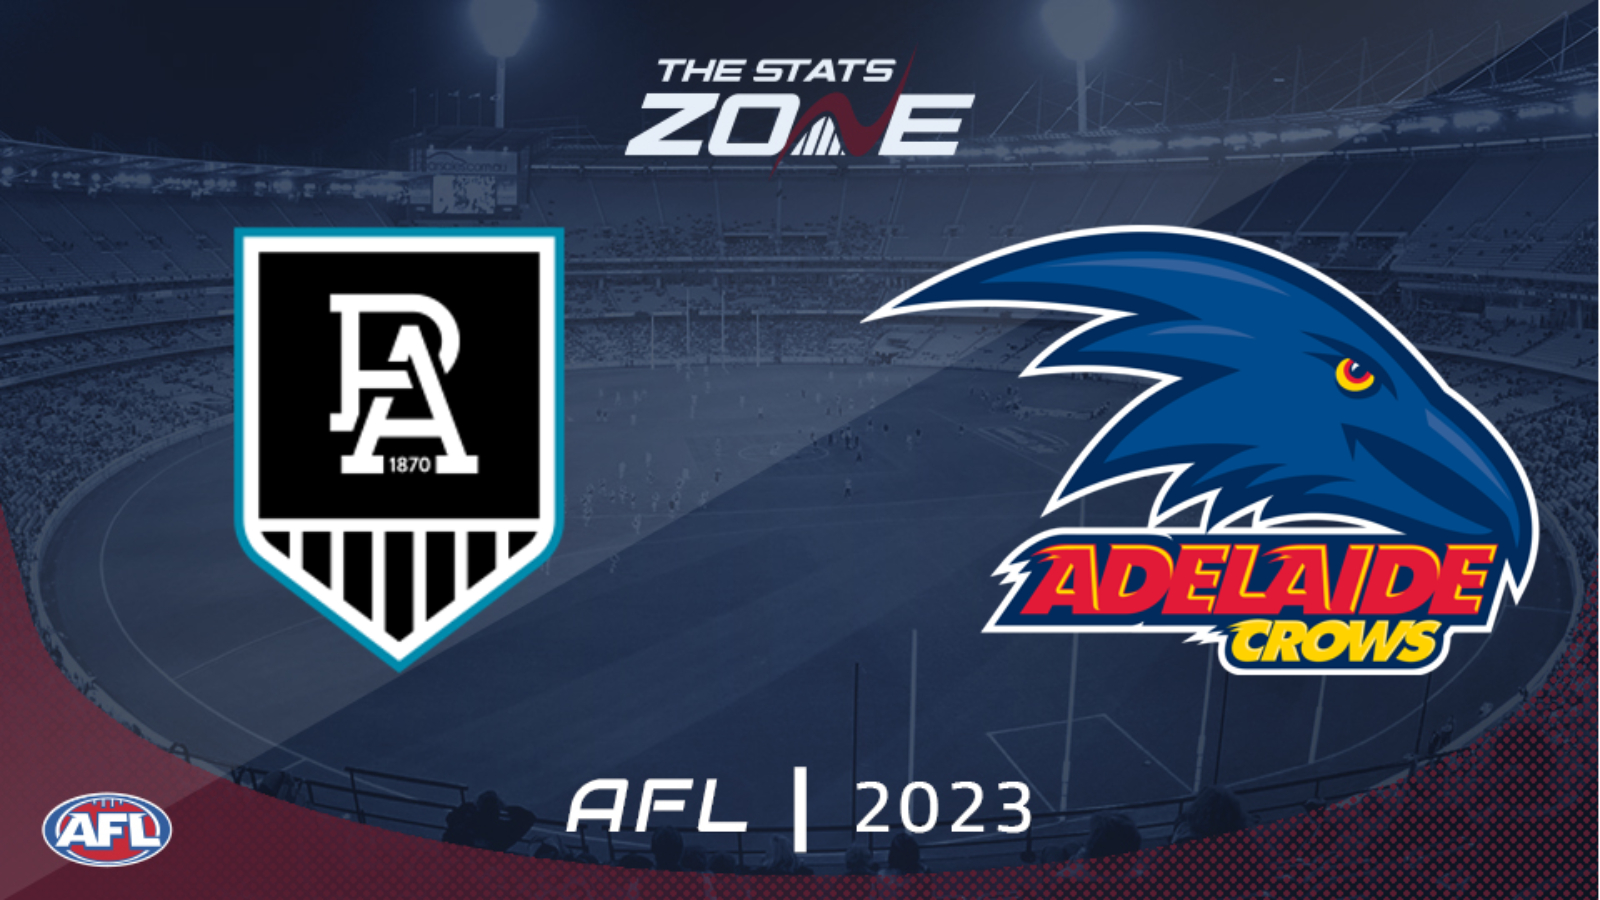 Port Adelaide Vs Adelaide Crows Round 3 Preview And Prediction 2023 Afl The Stats Zone